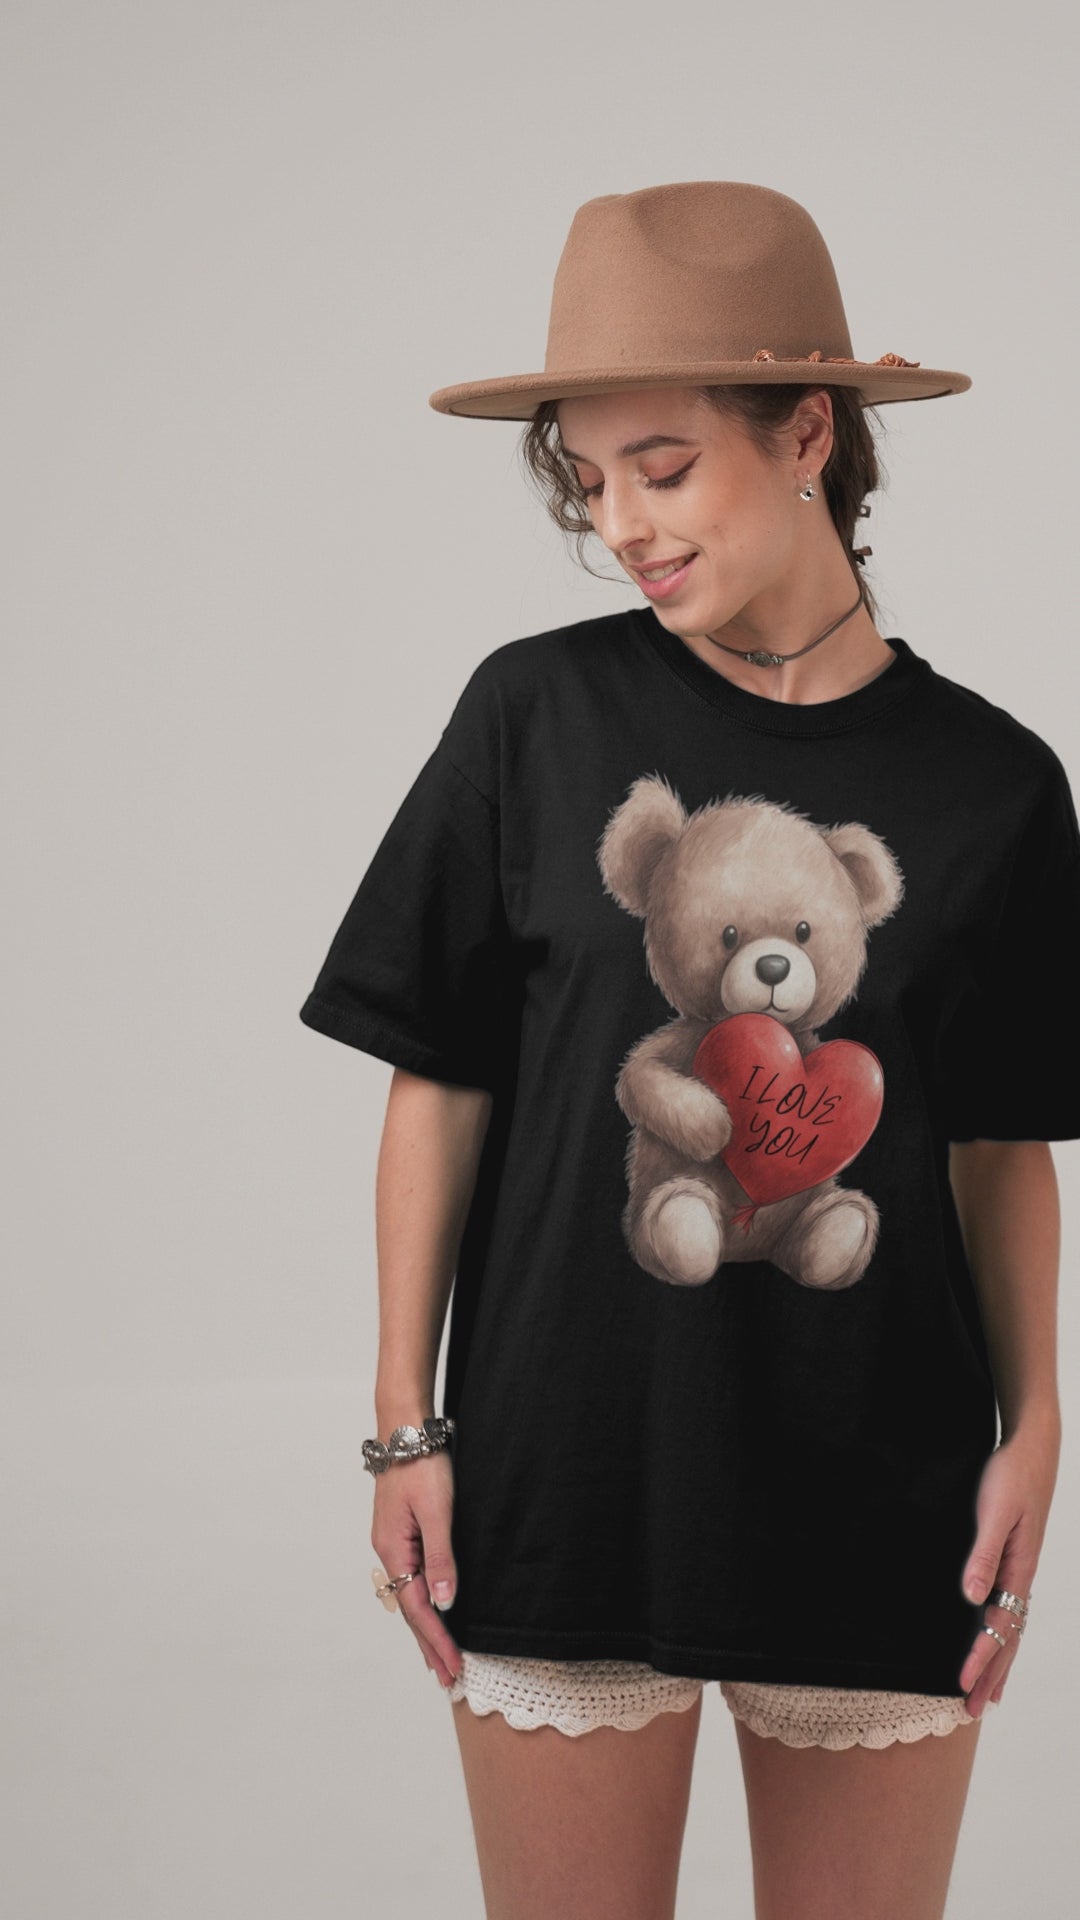 A woman wearing a black oversized t-shirt with a graphic of a cuddly teddy bear holding a red heart that says 'I Love You', paired with a delicate lace skirt and layered bracelets, creating a blend of soft and edgy styles.